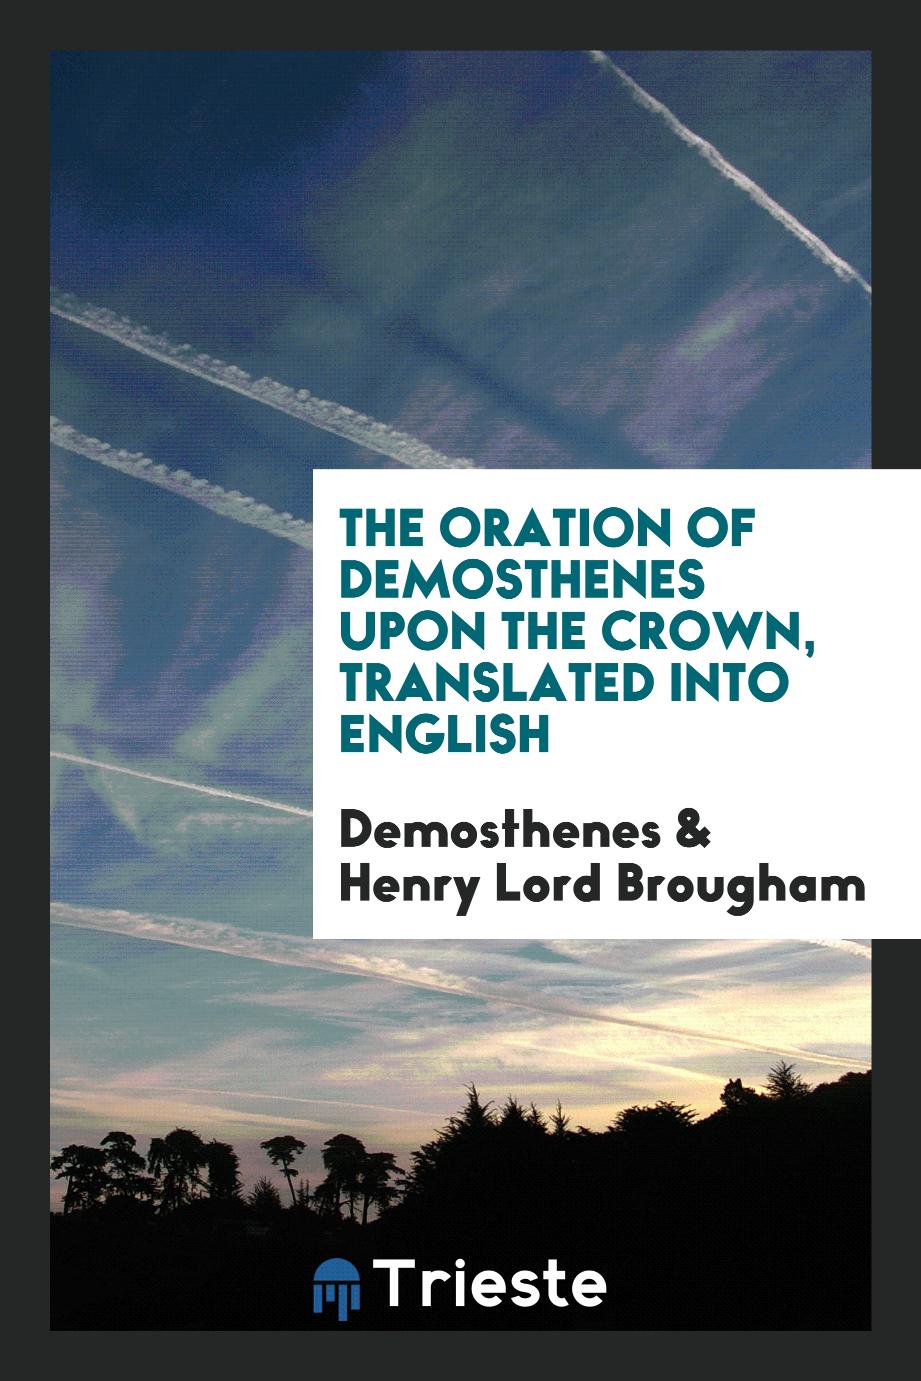 The Oration of Demosthenes upon the Crown, Translated into English